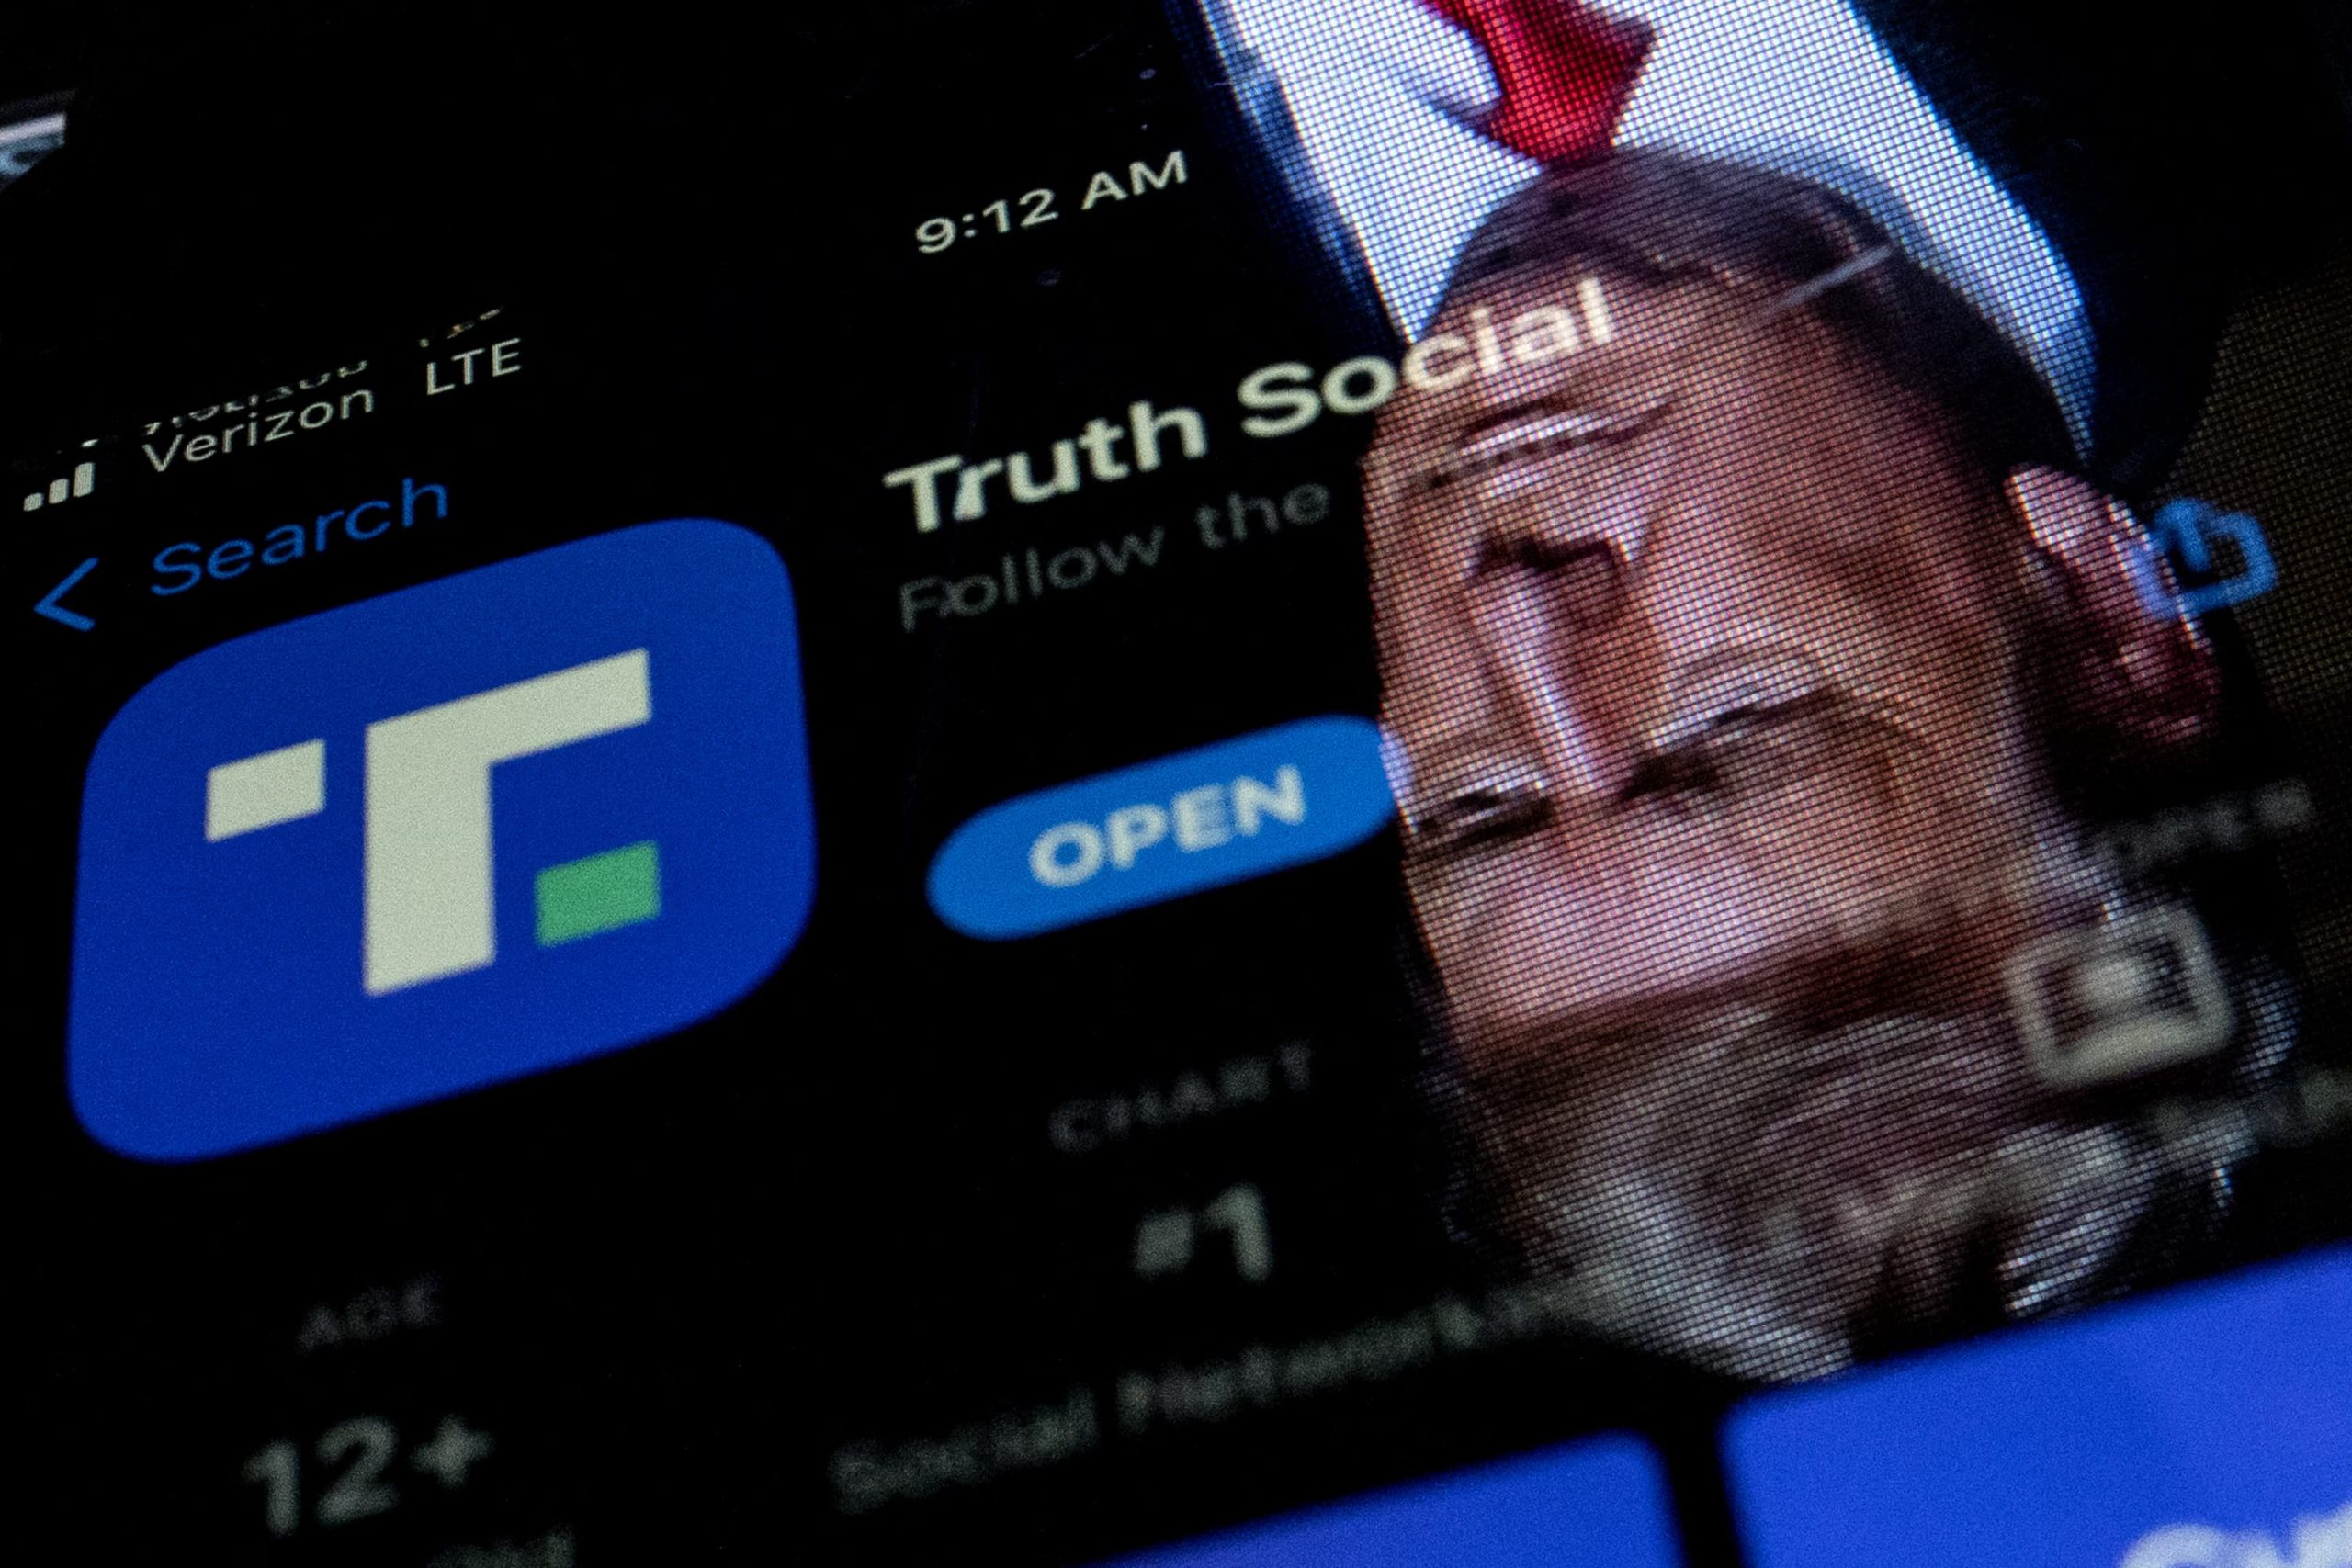 Trump Media's Stock Tumbles After SEC Approves Additional Share Issuance for Truth Social